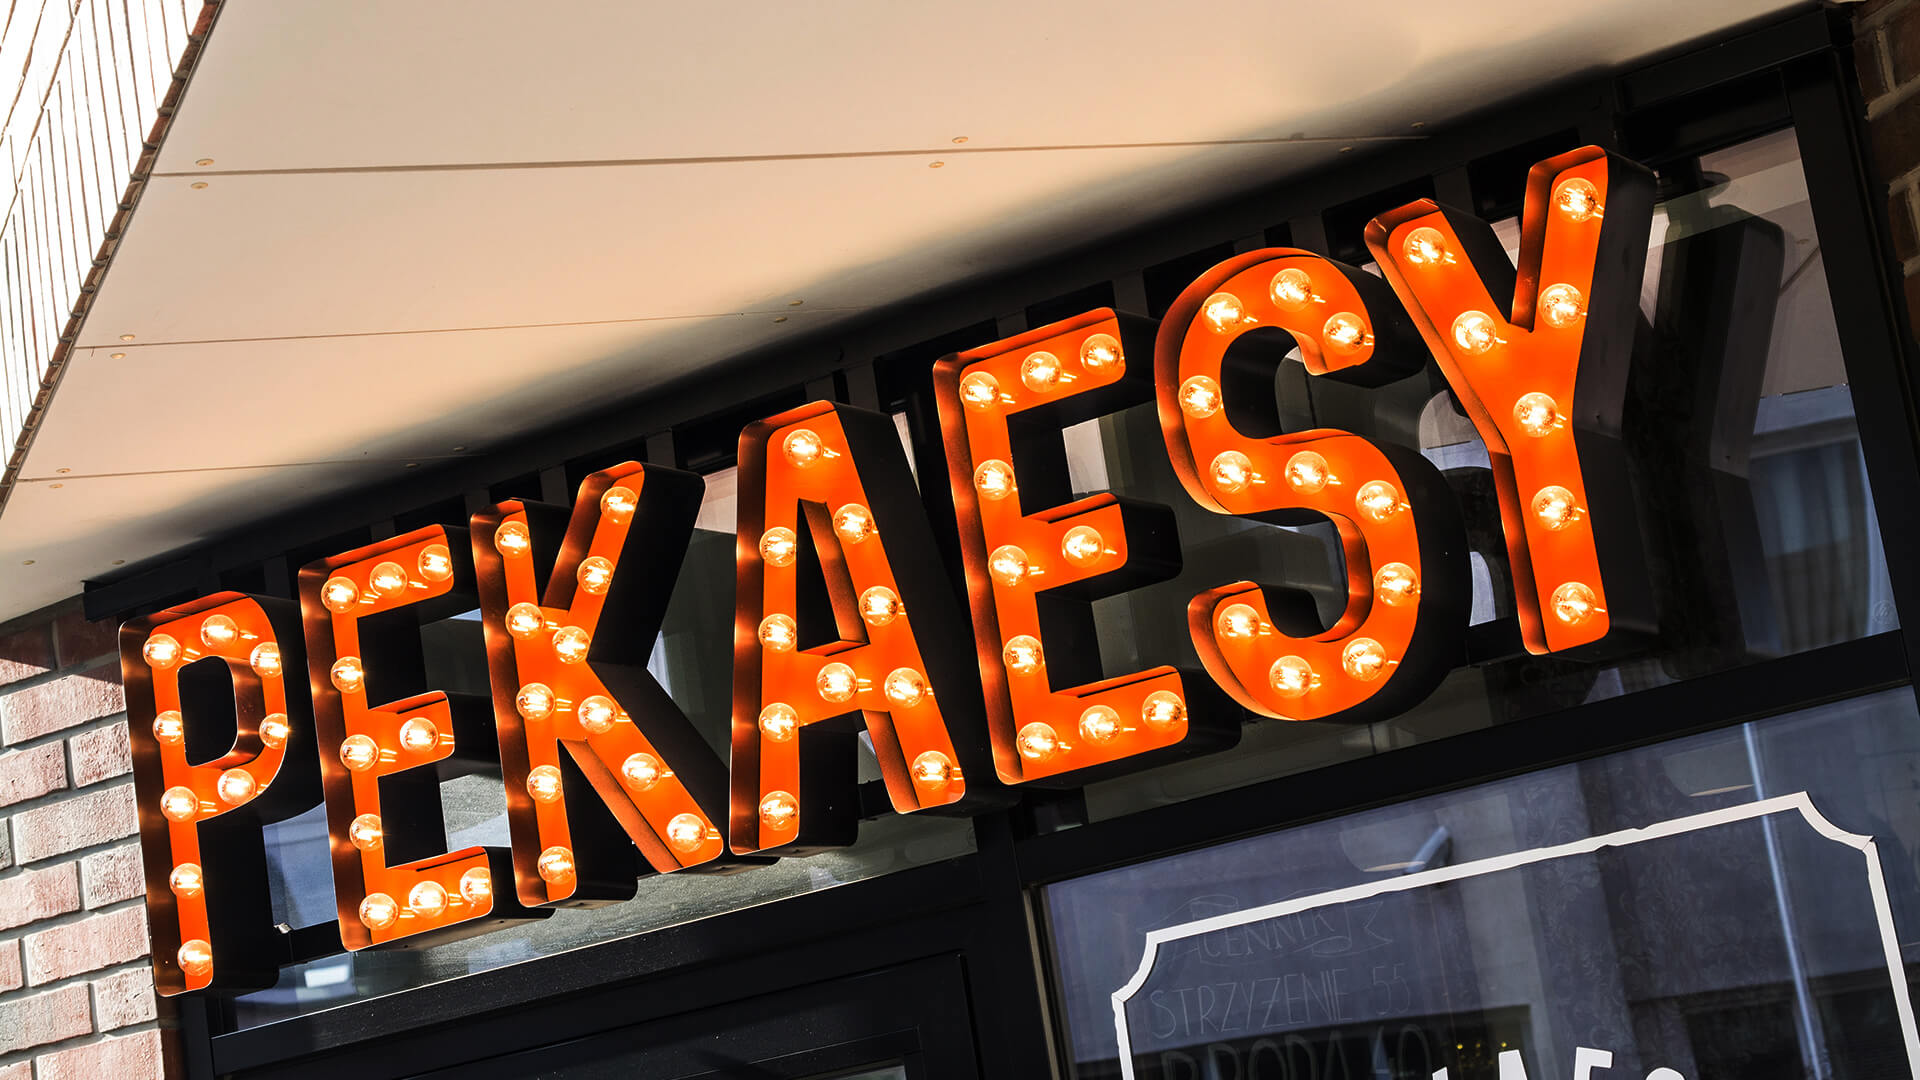 pekaesy hair salonbarber shop - pekaesy-letters-with-lights-over-the-entry-to-barbera-letters-with-coloured-on-heights-mounted-to-the-panel-on-the-window-with-company-logo-words-spatial-3d-poznan